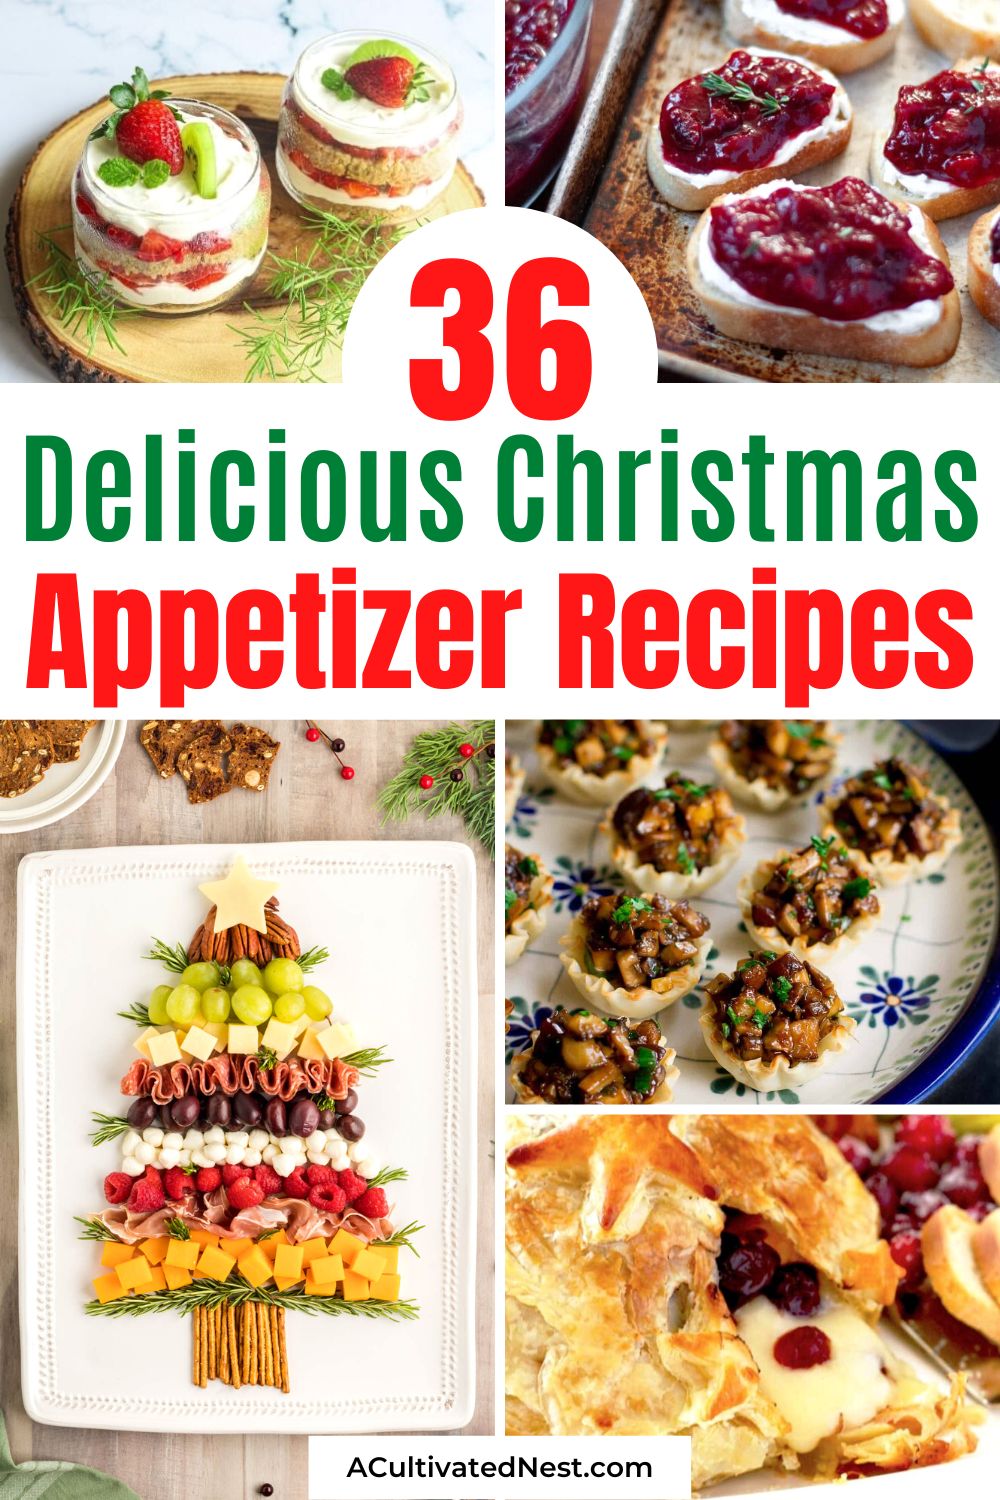 36 Delicious Christmas Appetizers- Get your Christmas party started off right with these easy and delicious Christmas appetizers! Your friends and family are sure to love them! | #ChristmasAppetizers #Christmas#appetizerRecipes #recipe #ACultivatedNest